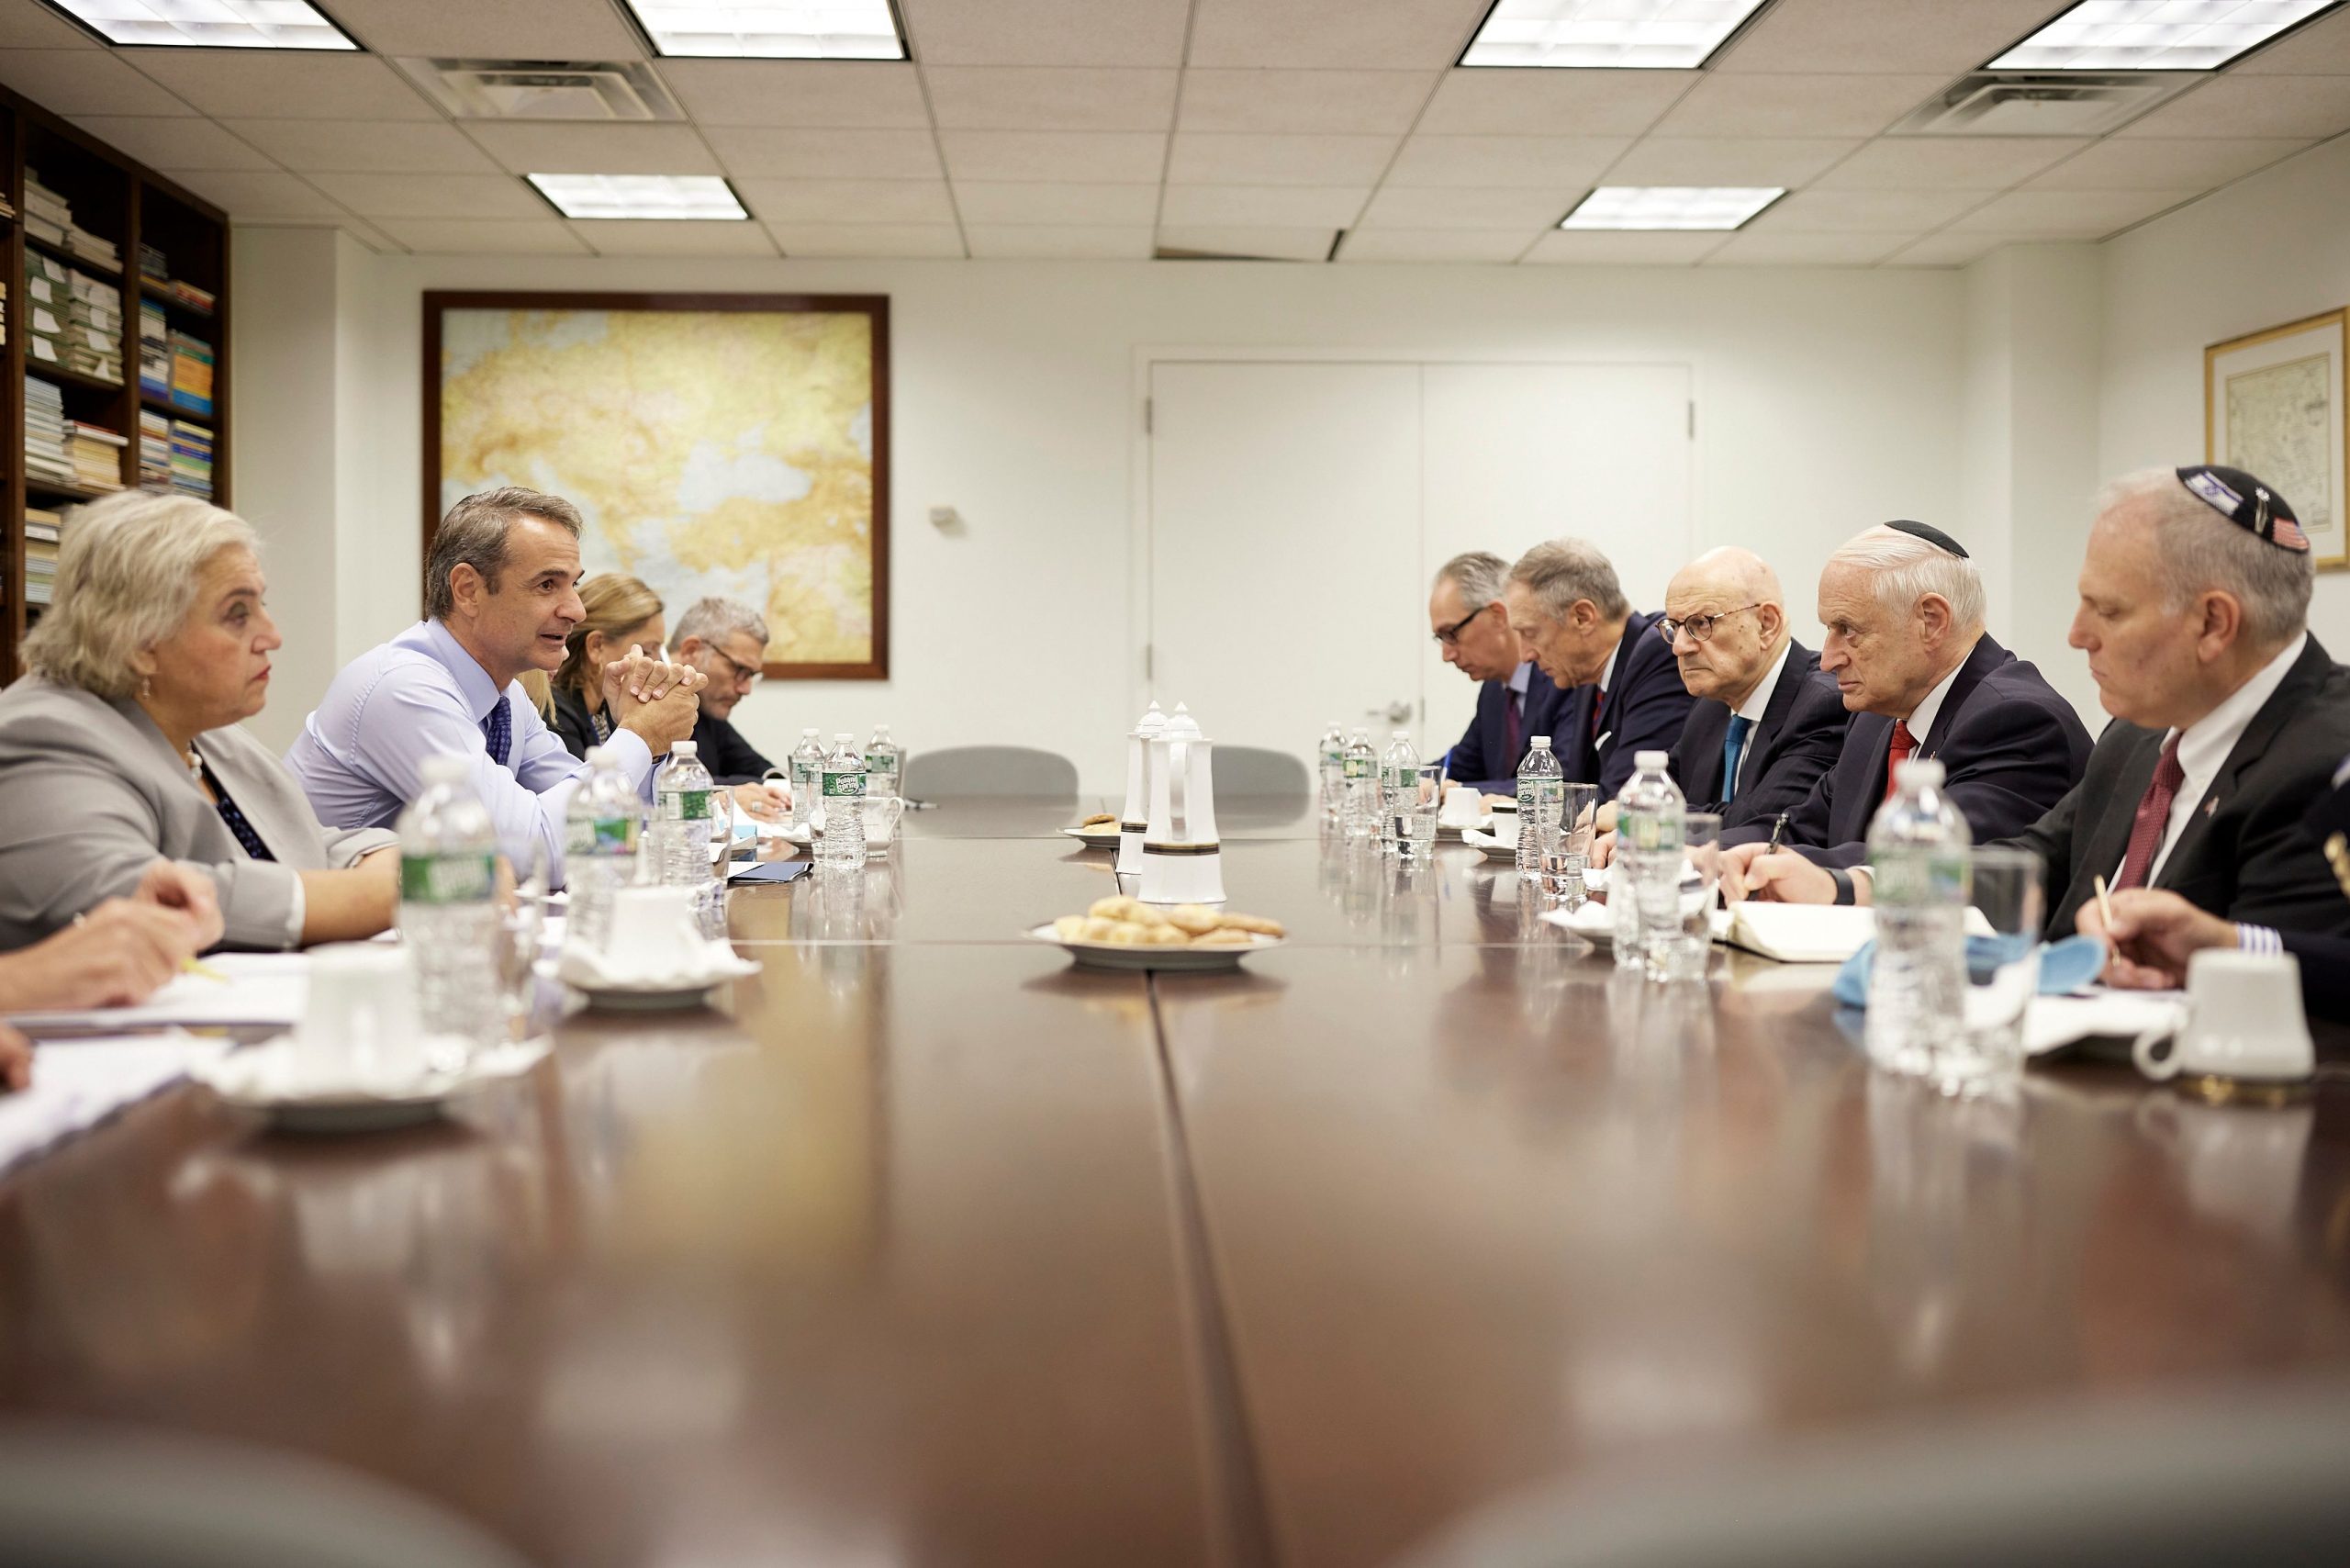 Mitsotakis meets with reps of American Jewish groups on sidelines of UN general assembly